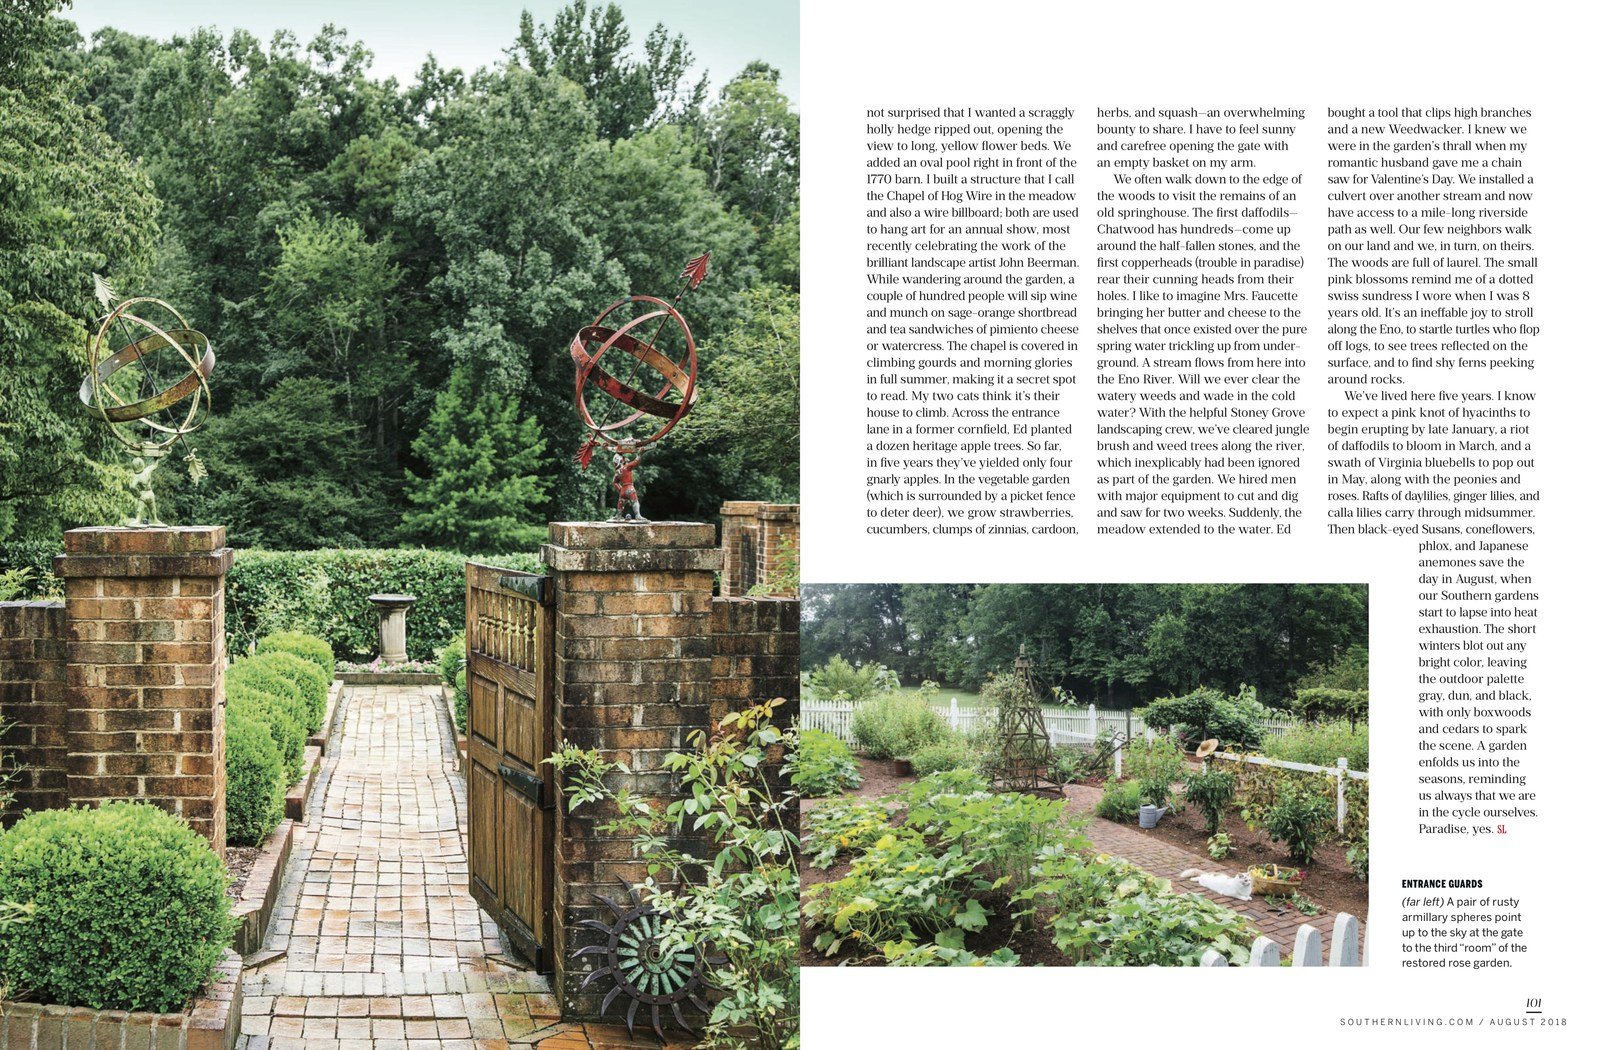 VictoriaMaiolo-HelenNorman-SouthernLiving-August2018-5.jpg